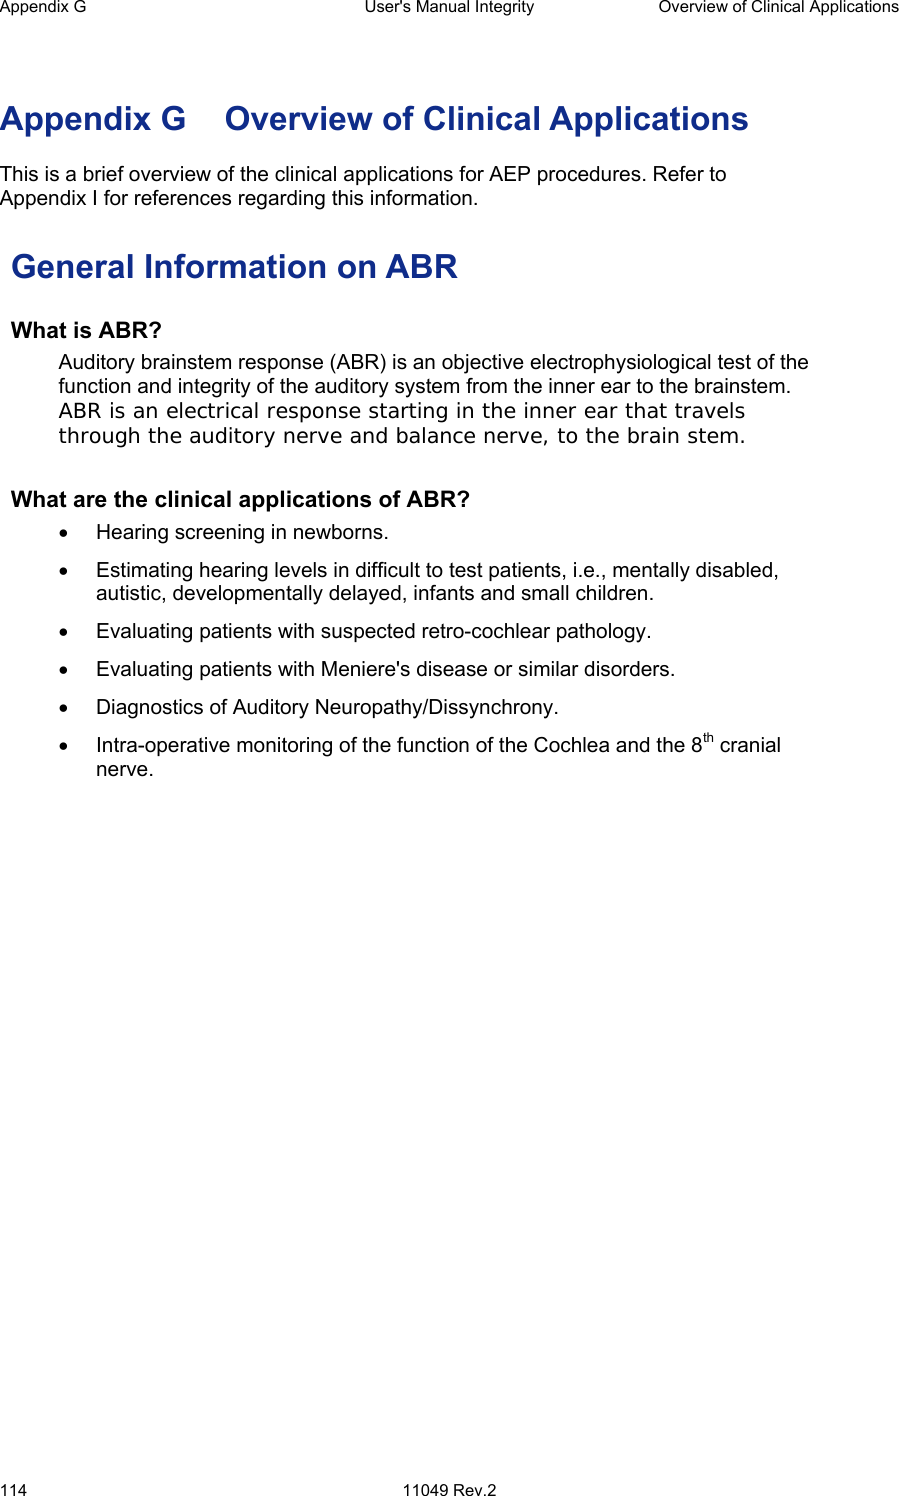 Appendix G  User&apos;s Manual Integrity  Overview of Clinical Applications 114 11049 Rev.2   Appendix G  Overview of Clinical Applications  This is a brief overview of the clinical applications for AEP procedures. Refer to   Appendix I for references regarding this information. General Information on ABR What is ABR?   Auditory brainstem response (ABR) is an objective electrophysiological test of the function and integrity of the auditory system from the inner ear to the brainstem. ABR is an electrical response starting in the inner ear that travels through the auditory nerve and balance nerve, to the brain stem. What are the clinical applications of ABR?  •  Hearing screening in newborns.  •  Estimating hearing levels in difficult to test patients, i.e., mentally disabled, autistic, developmentally delayed, infants and small children.  •  Evaluating patients with suspected retro-cochlear pathology.  •  Evaluating patients with Meniere&apos;s disease or similar disorders. •  Diagnostics of Auditory Neuropathy/Dissynchrony.  •  Intra-operative monitoring of the function of the Cochlea and the 8th cranial nerve.  